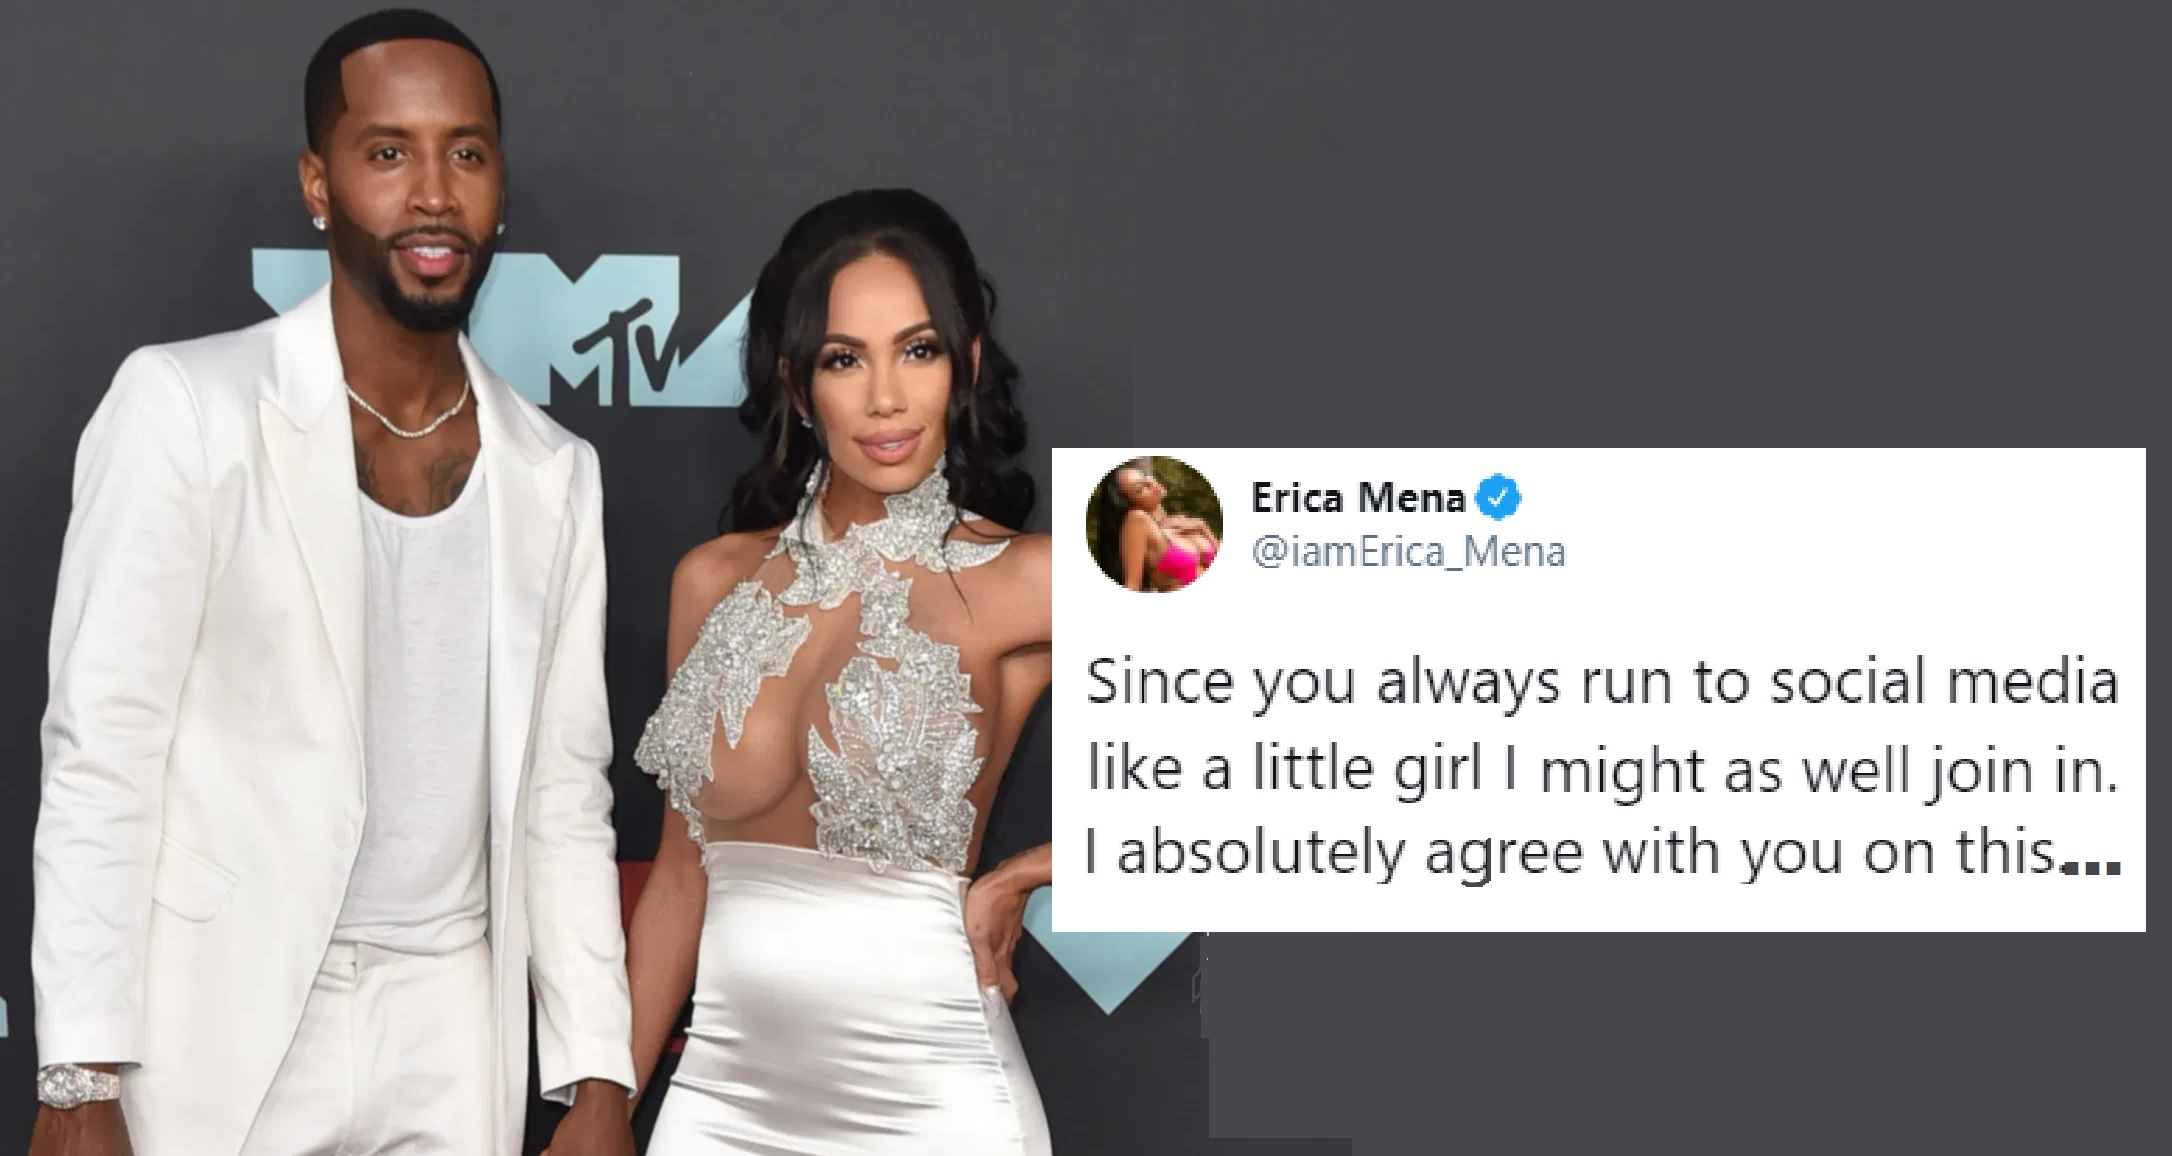 Erica Mena Takes To Social Media To Blast Safaree After He Publically Calls Their Marriage a ‘Mistake’